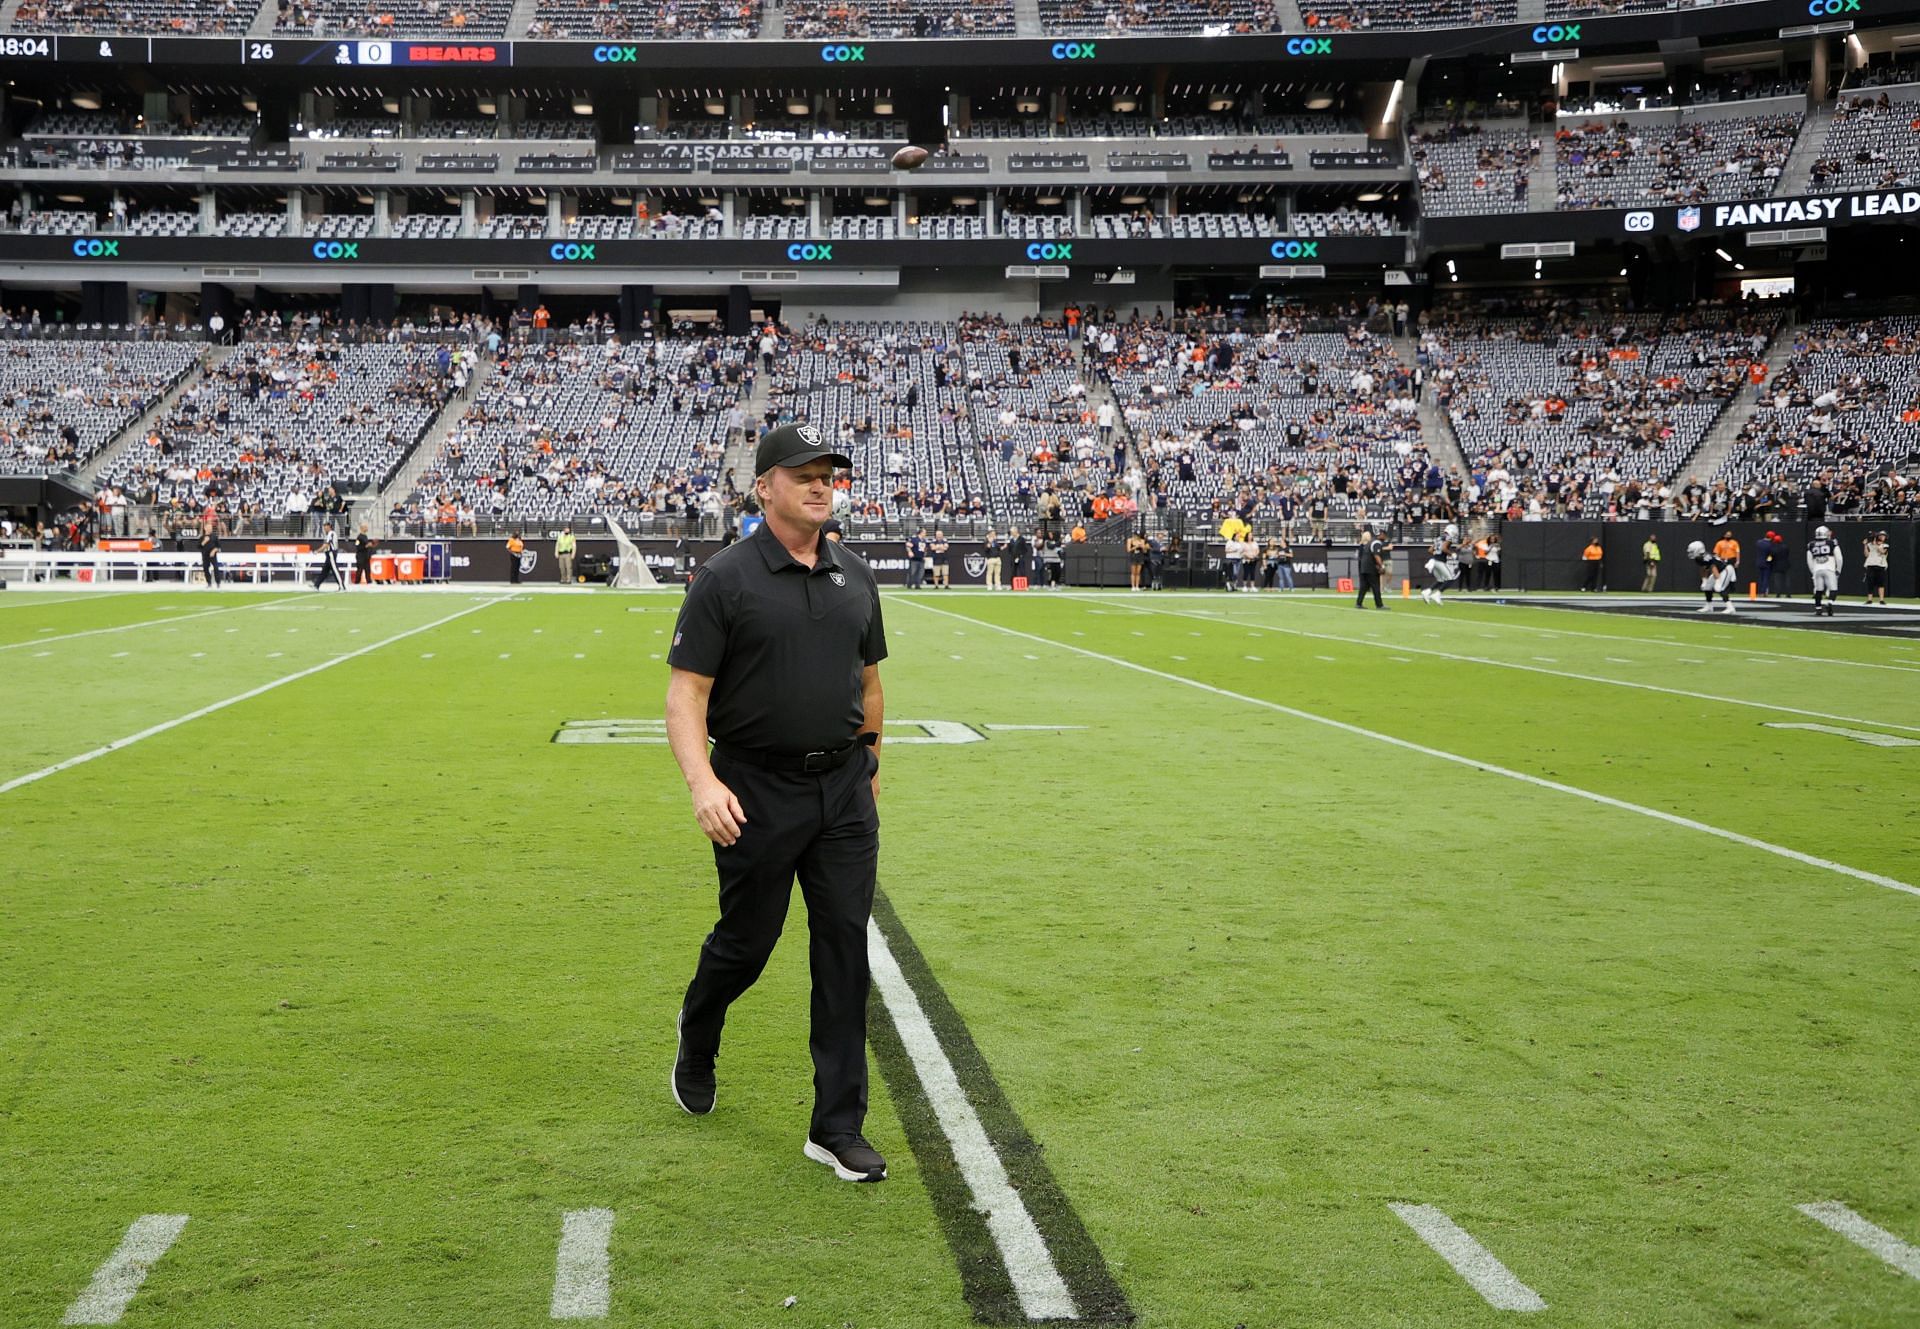 Jon Gruden remains intertwined legally with the NFL